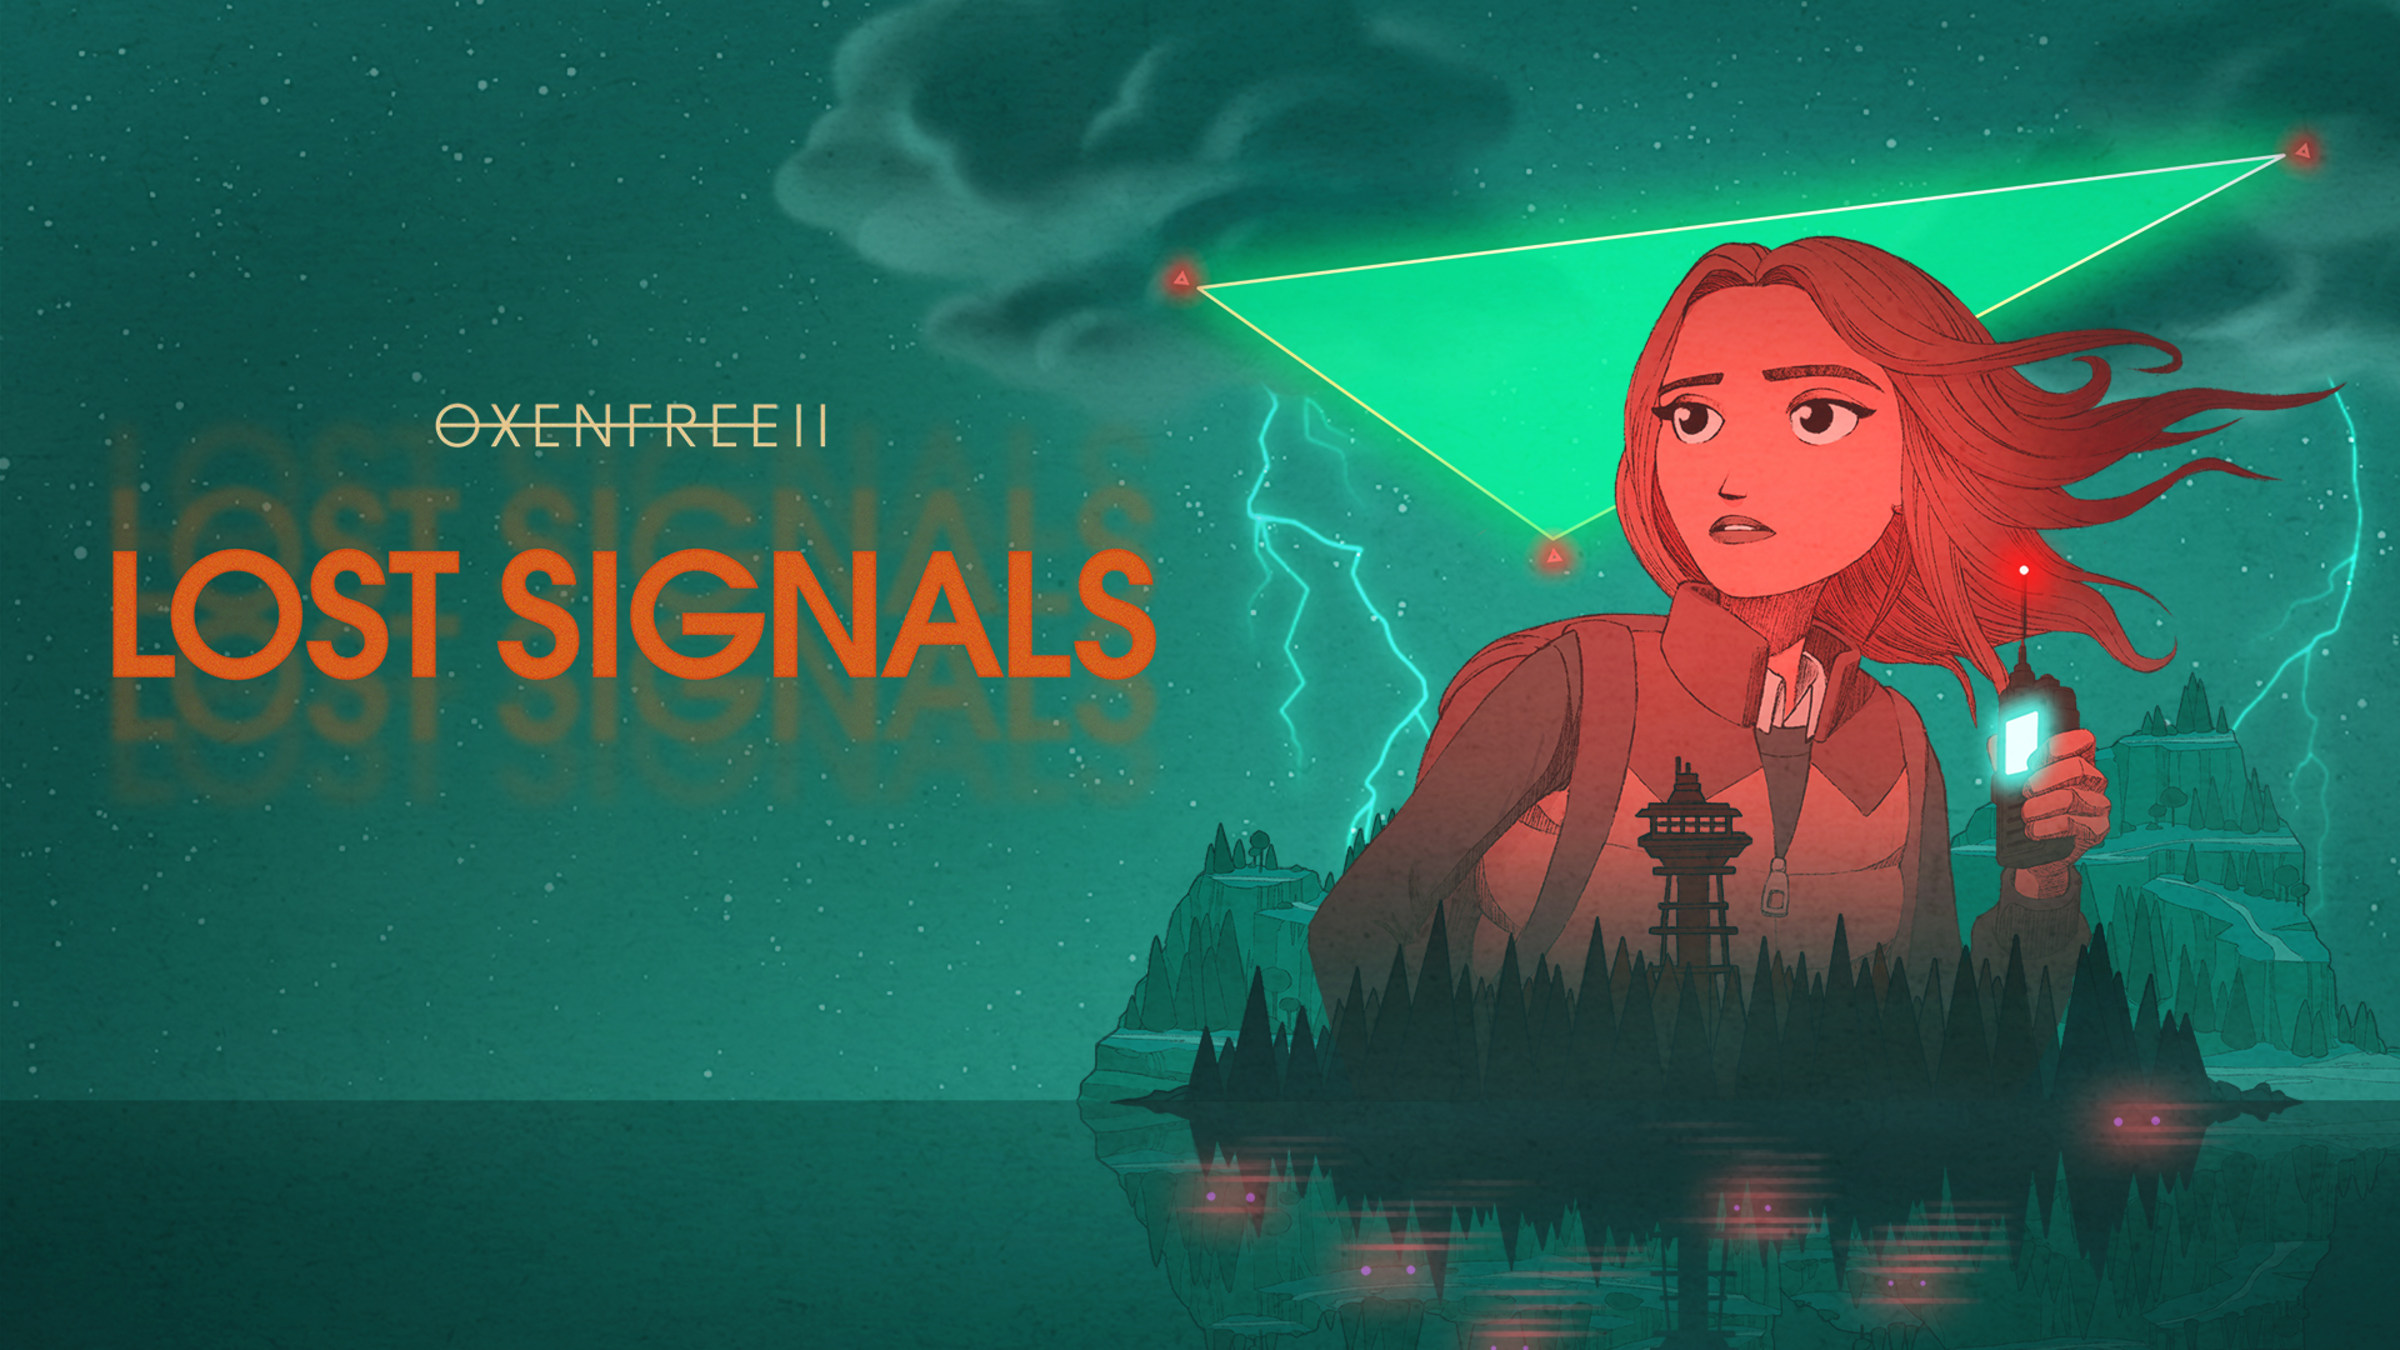 OXENFREE II: Lost Signals for Nintendo Switch - Nintendo Official Site